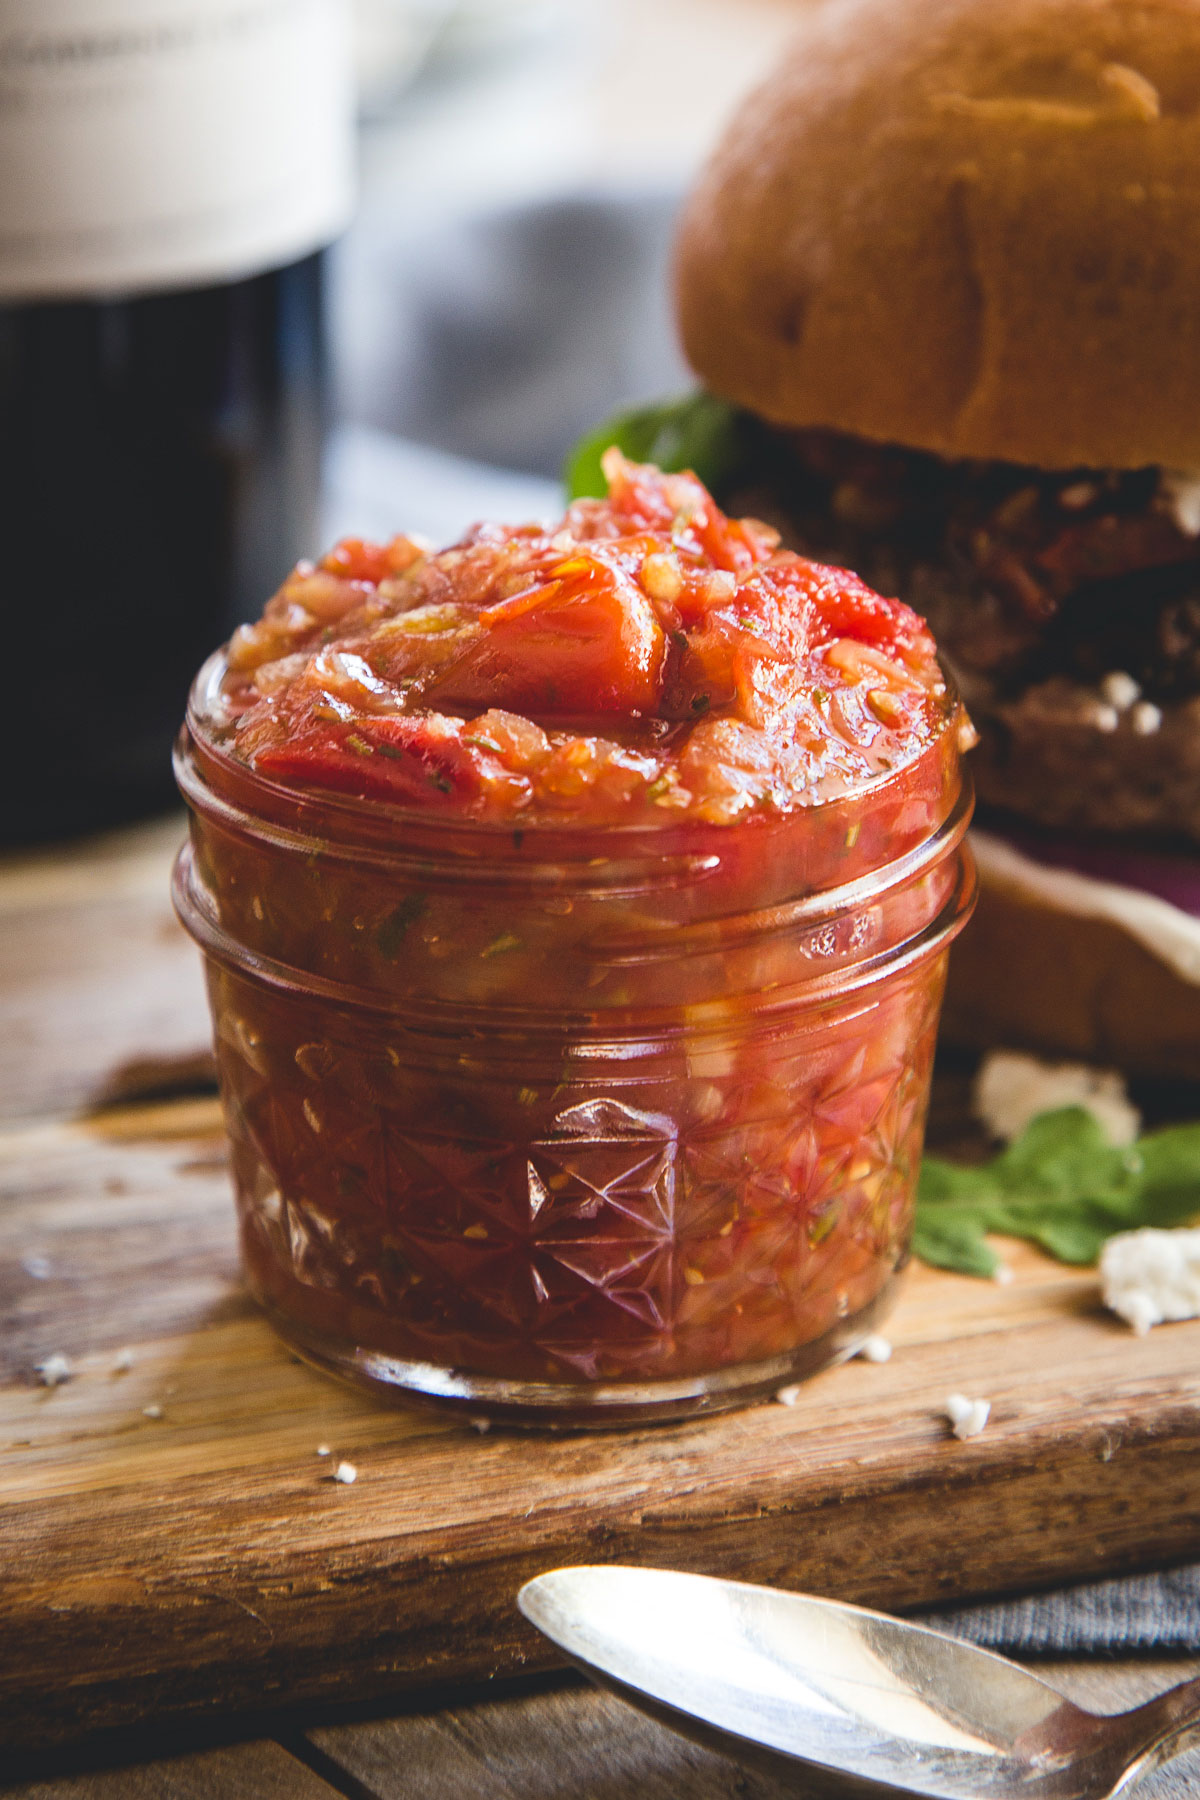 We like to serve this tomato jam as an accompaniment for grilled lamb burgers or salmon. It is also nice for a bruschetta with soft cheese.